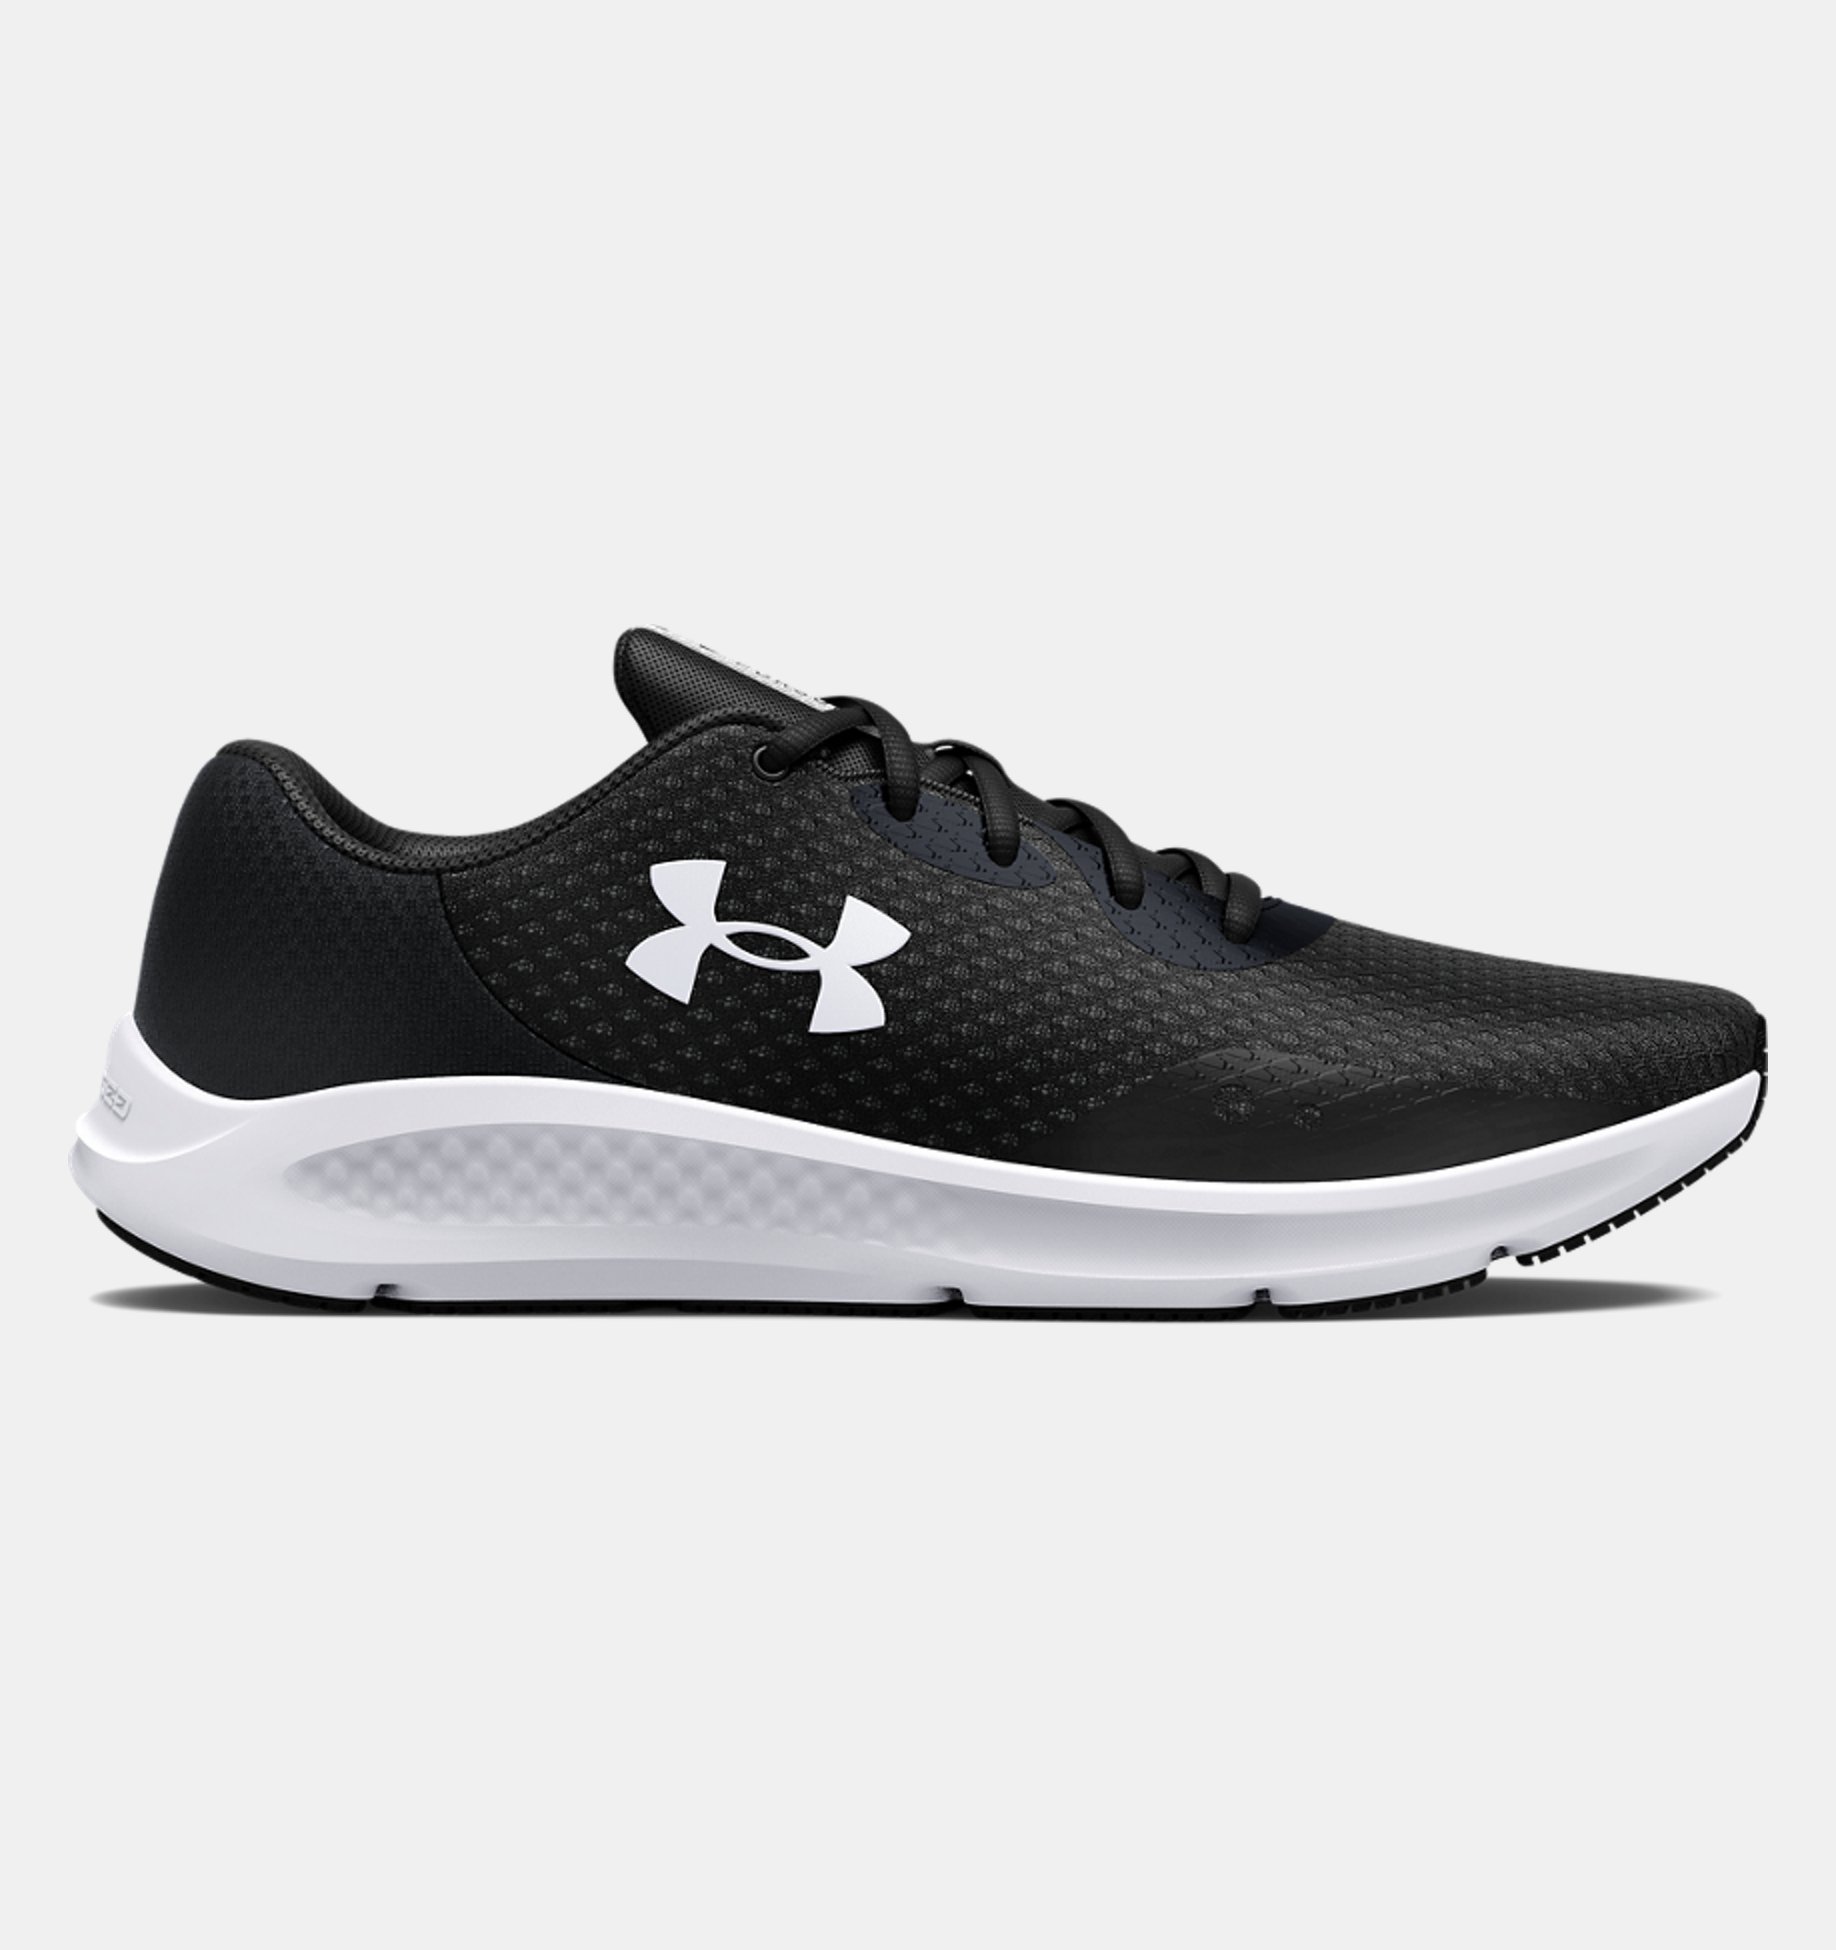 Where Can I Buy Under Armour Shoes in the Philippines?